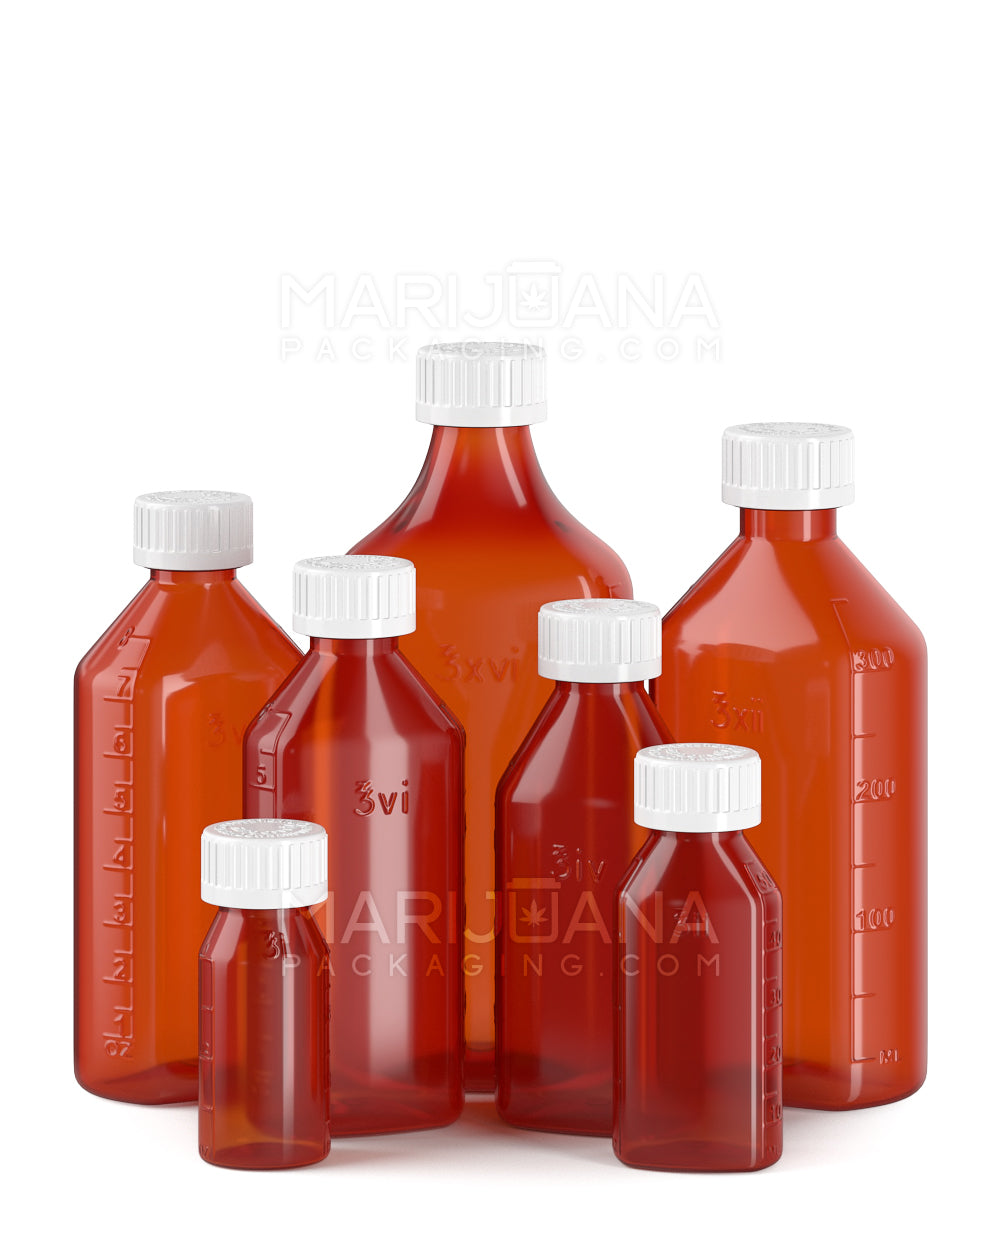 Child Resistant | Push Down & Turn Plastic Syrup Bottles w/ Oral Adapters | 8oz - Amber - 80 Count - 5